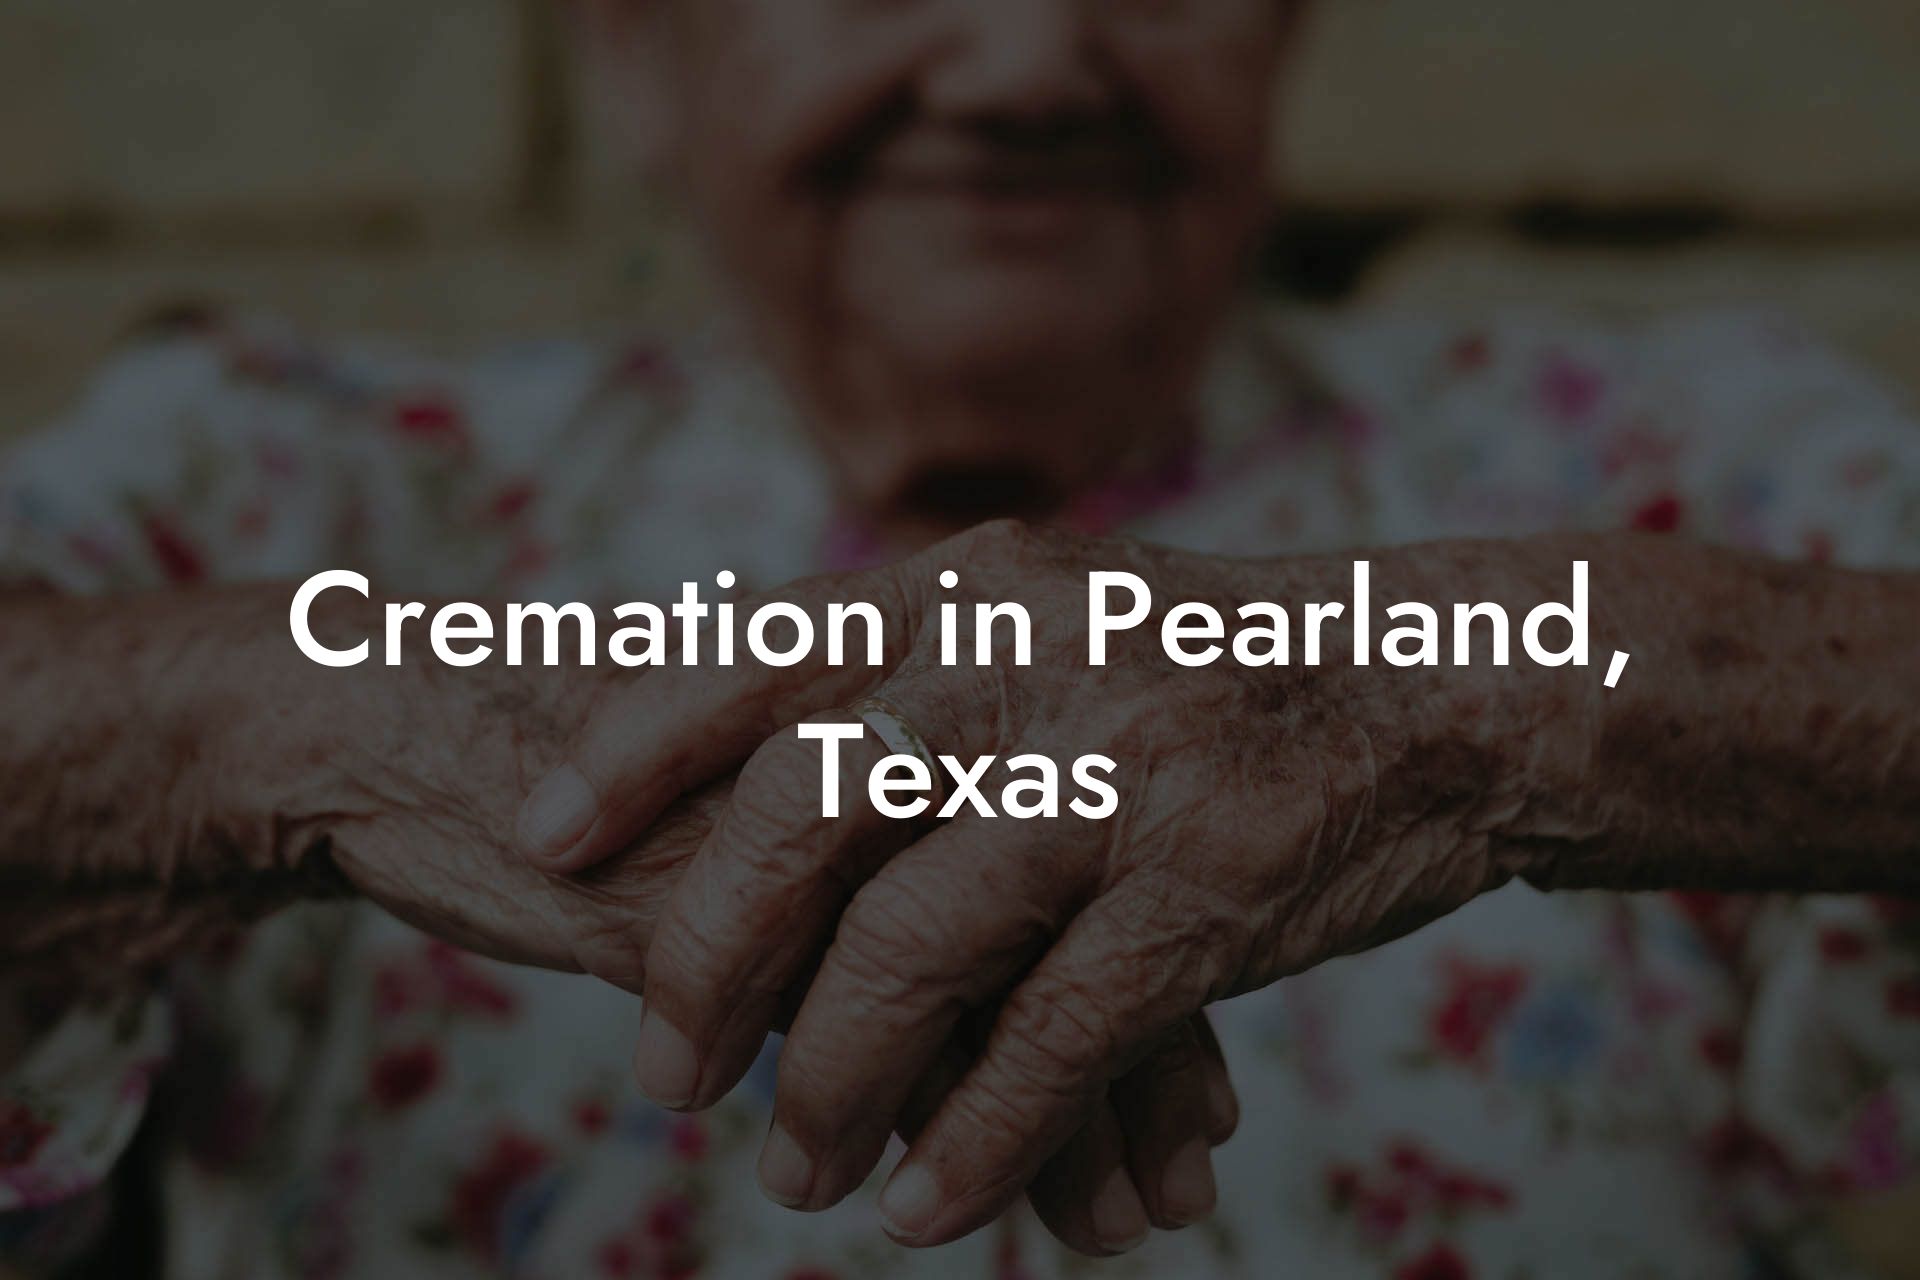 Cremation in Pearland, Texas